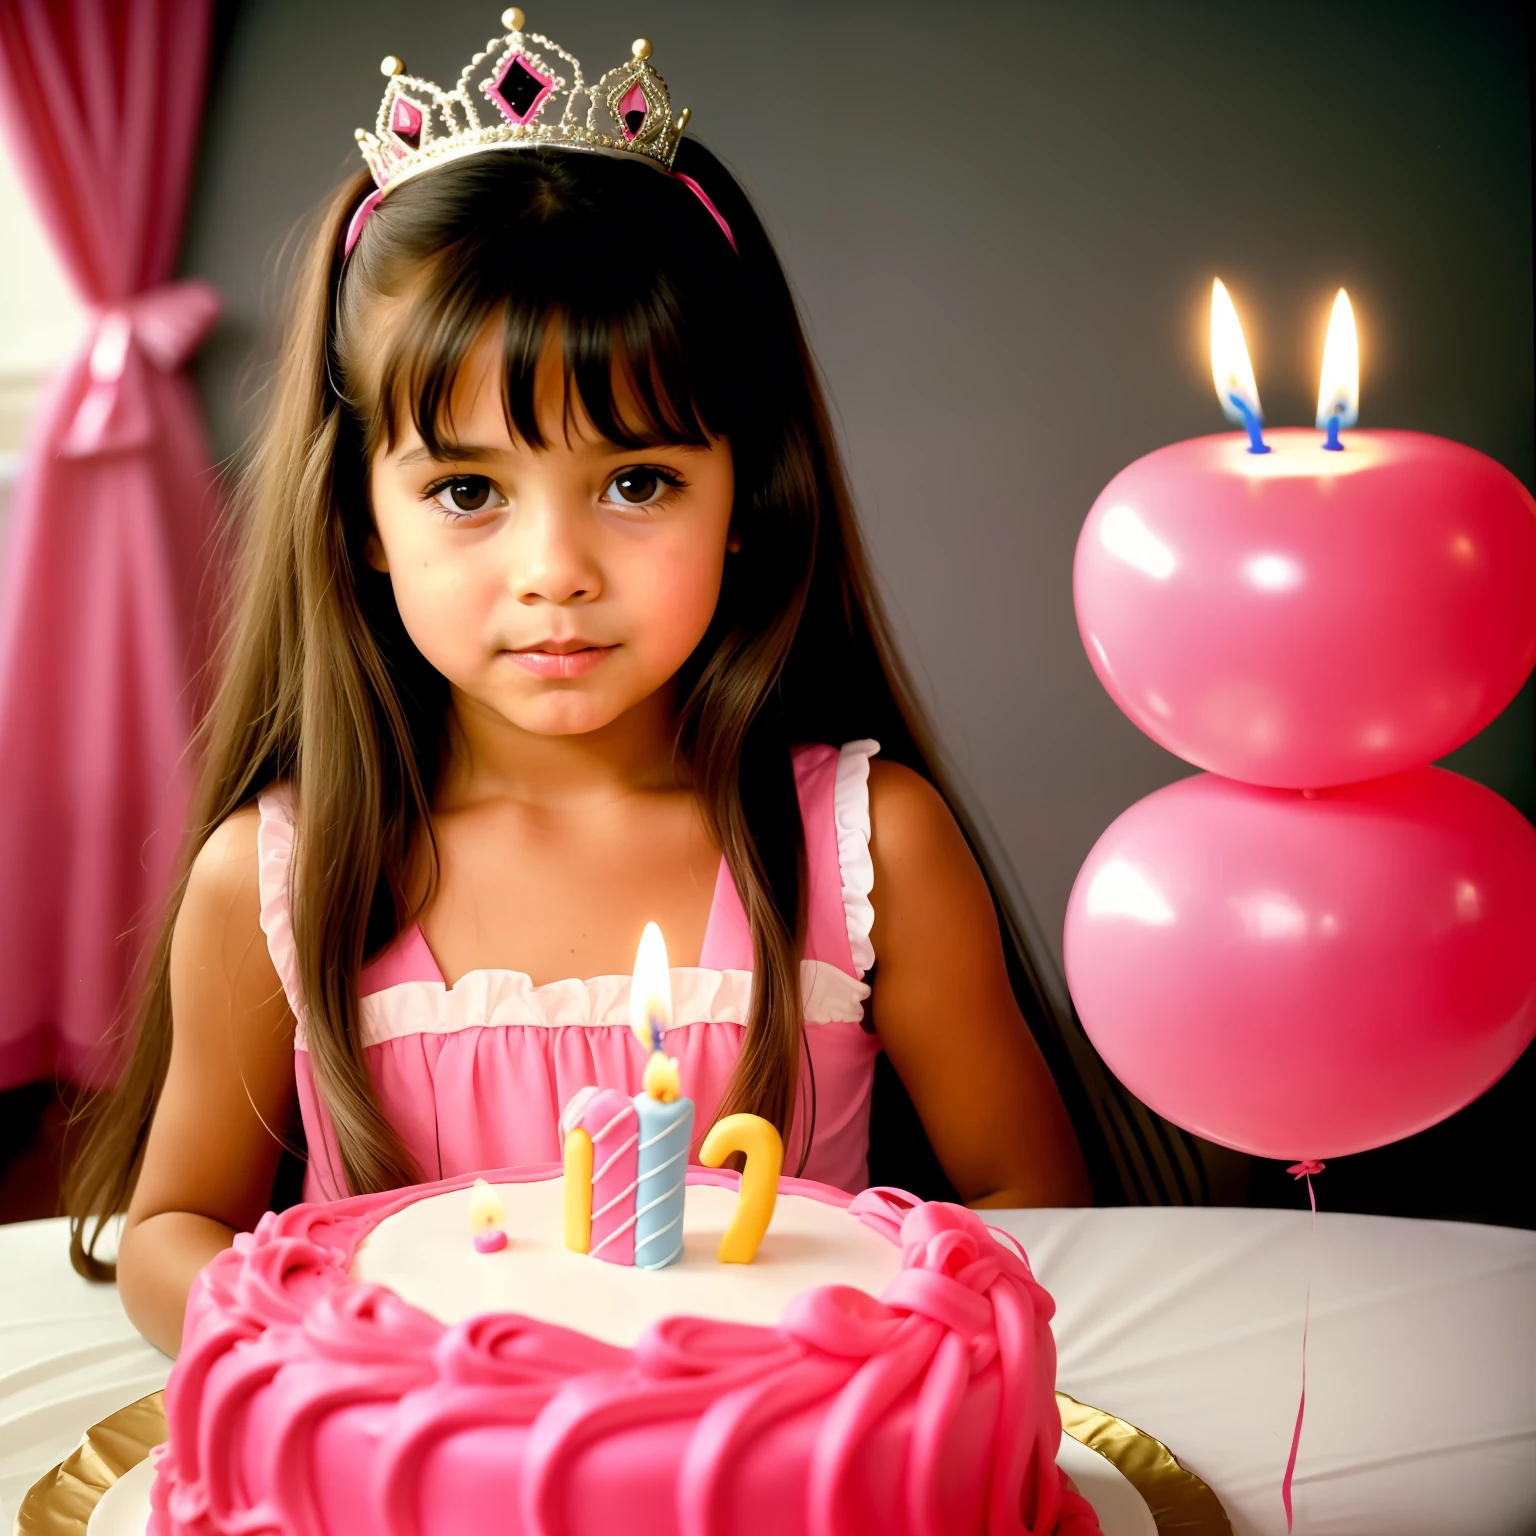 A 1980 photo of a 5-year-old girl with straight long hair wearing a pink princess costume blowing out 5 candles on top of a birthday cake, a well-detailed 80's cake, an unfathomable cake (pele altamente detalhada: 1.2)  soft-lighting, alta qualidade,